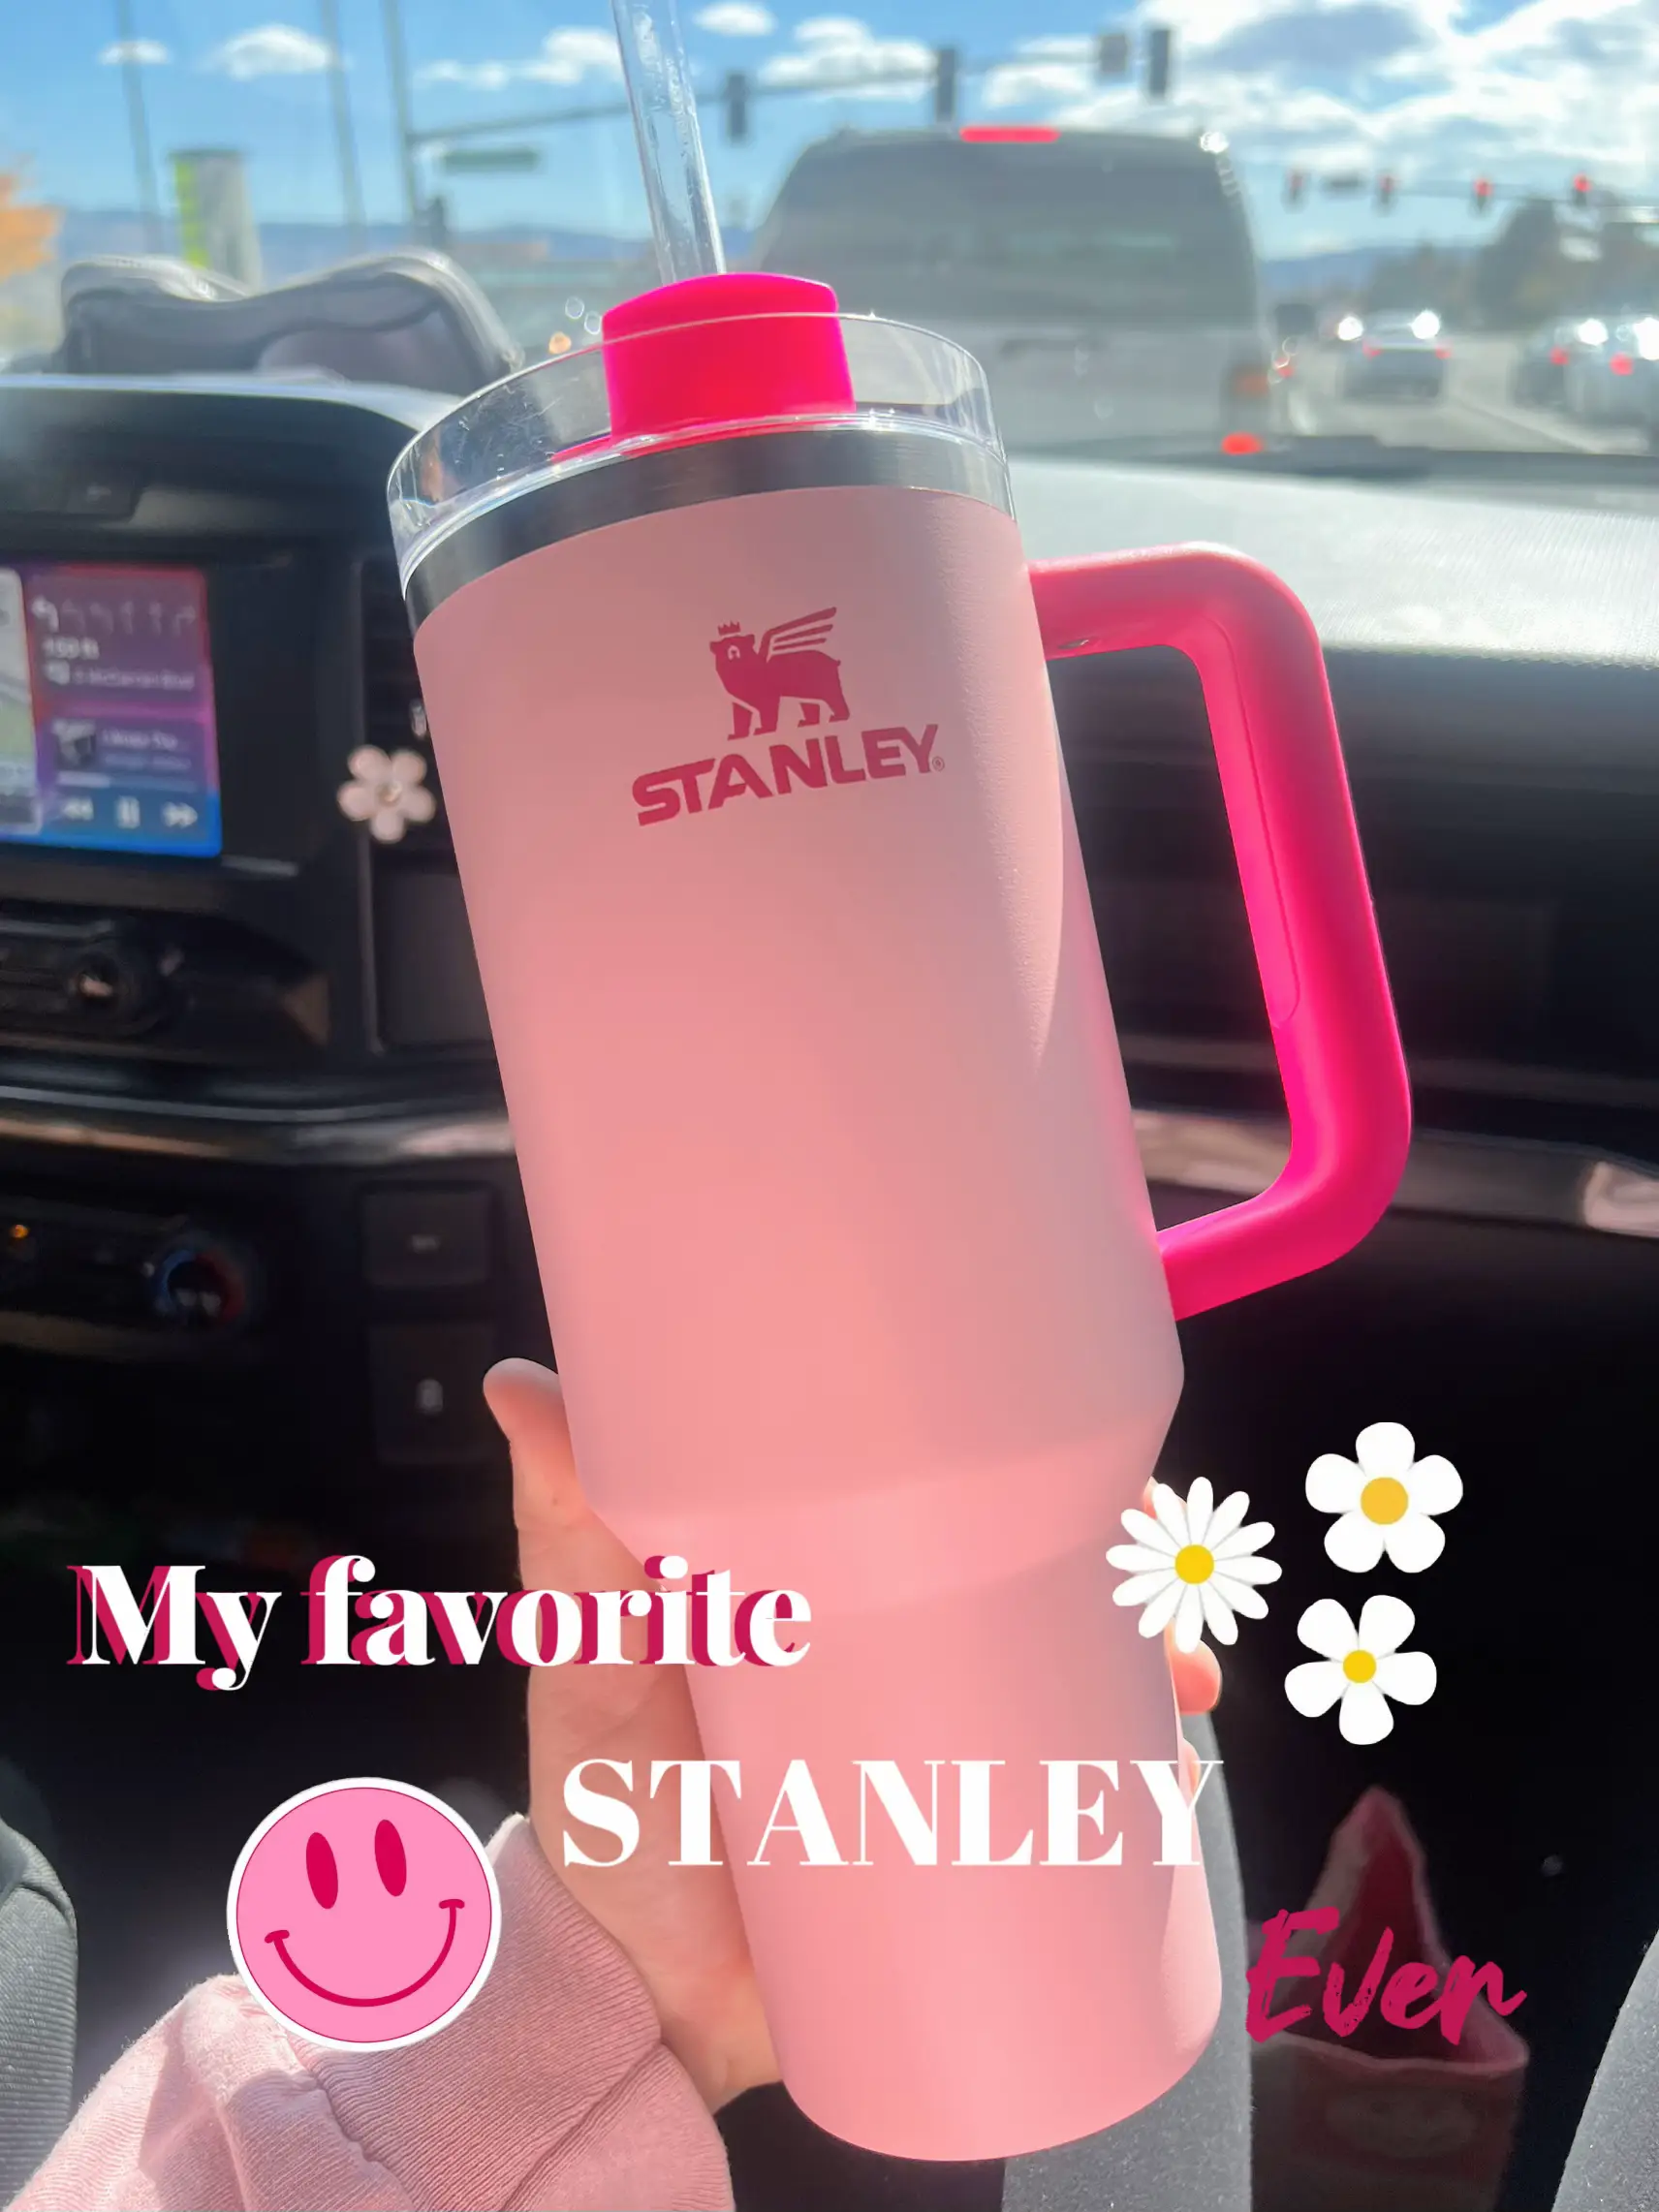 My 1st Stanley!! Peach color beautiful! @ivannamunoz5 #stanley #water